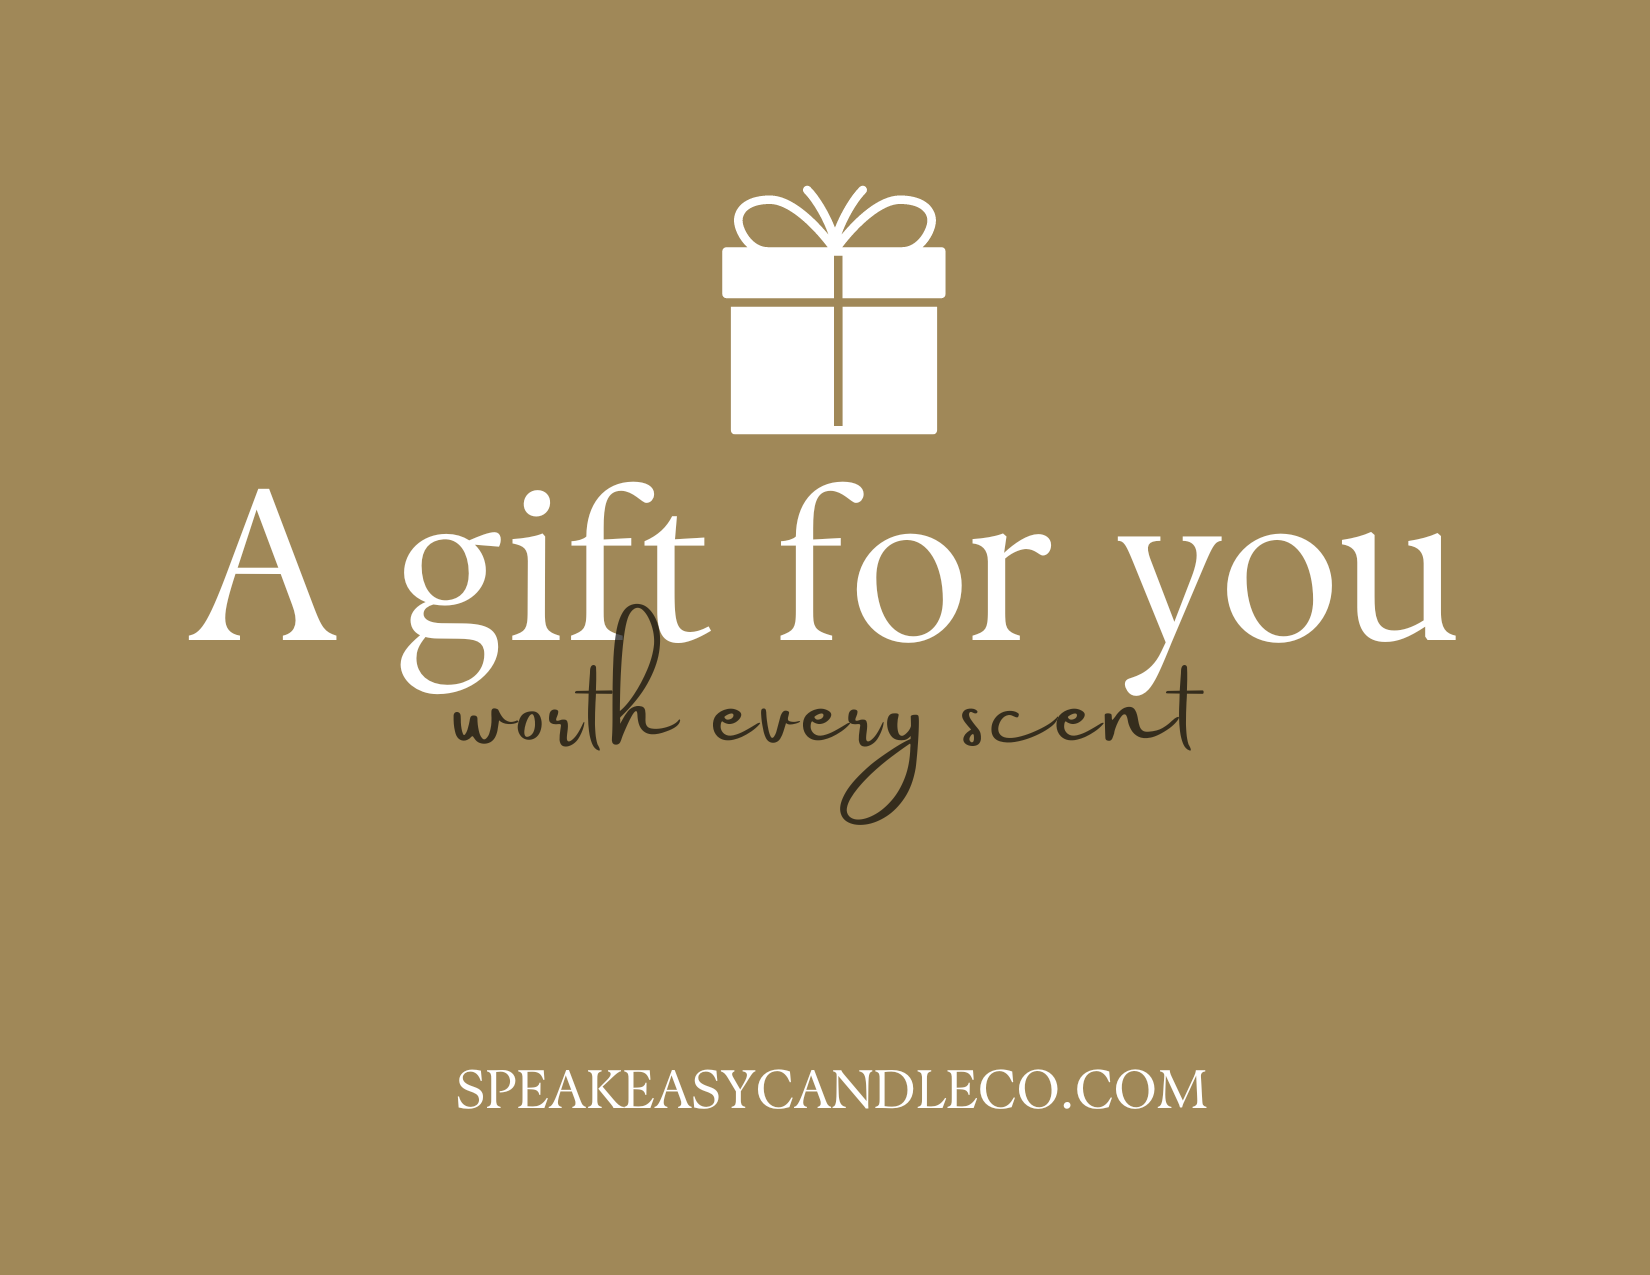 Speakeasy Candle Co. Gift Card